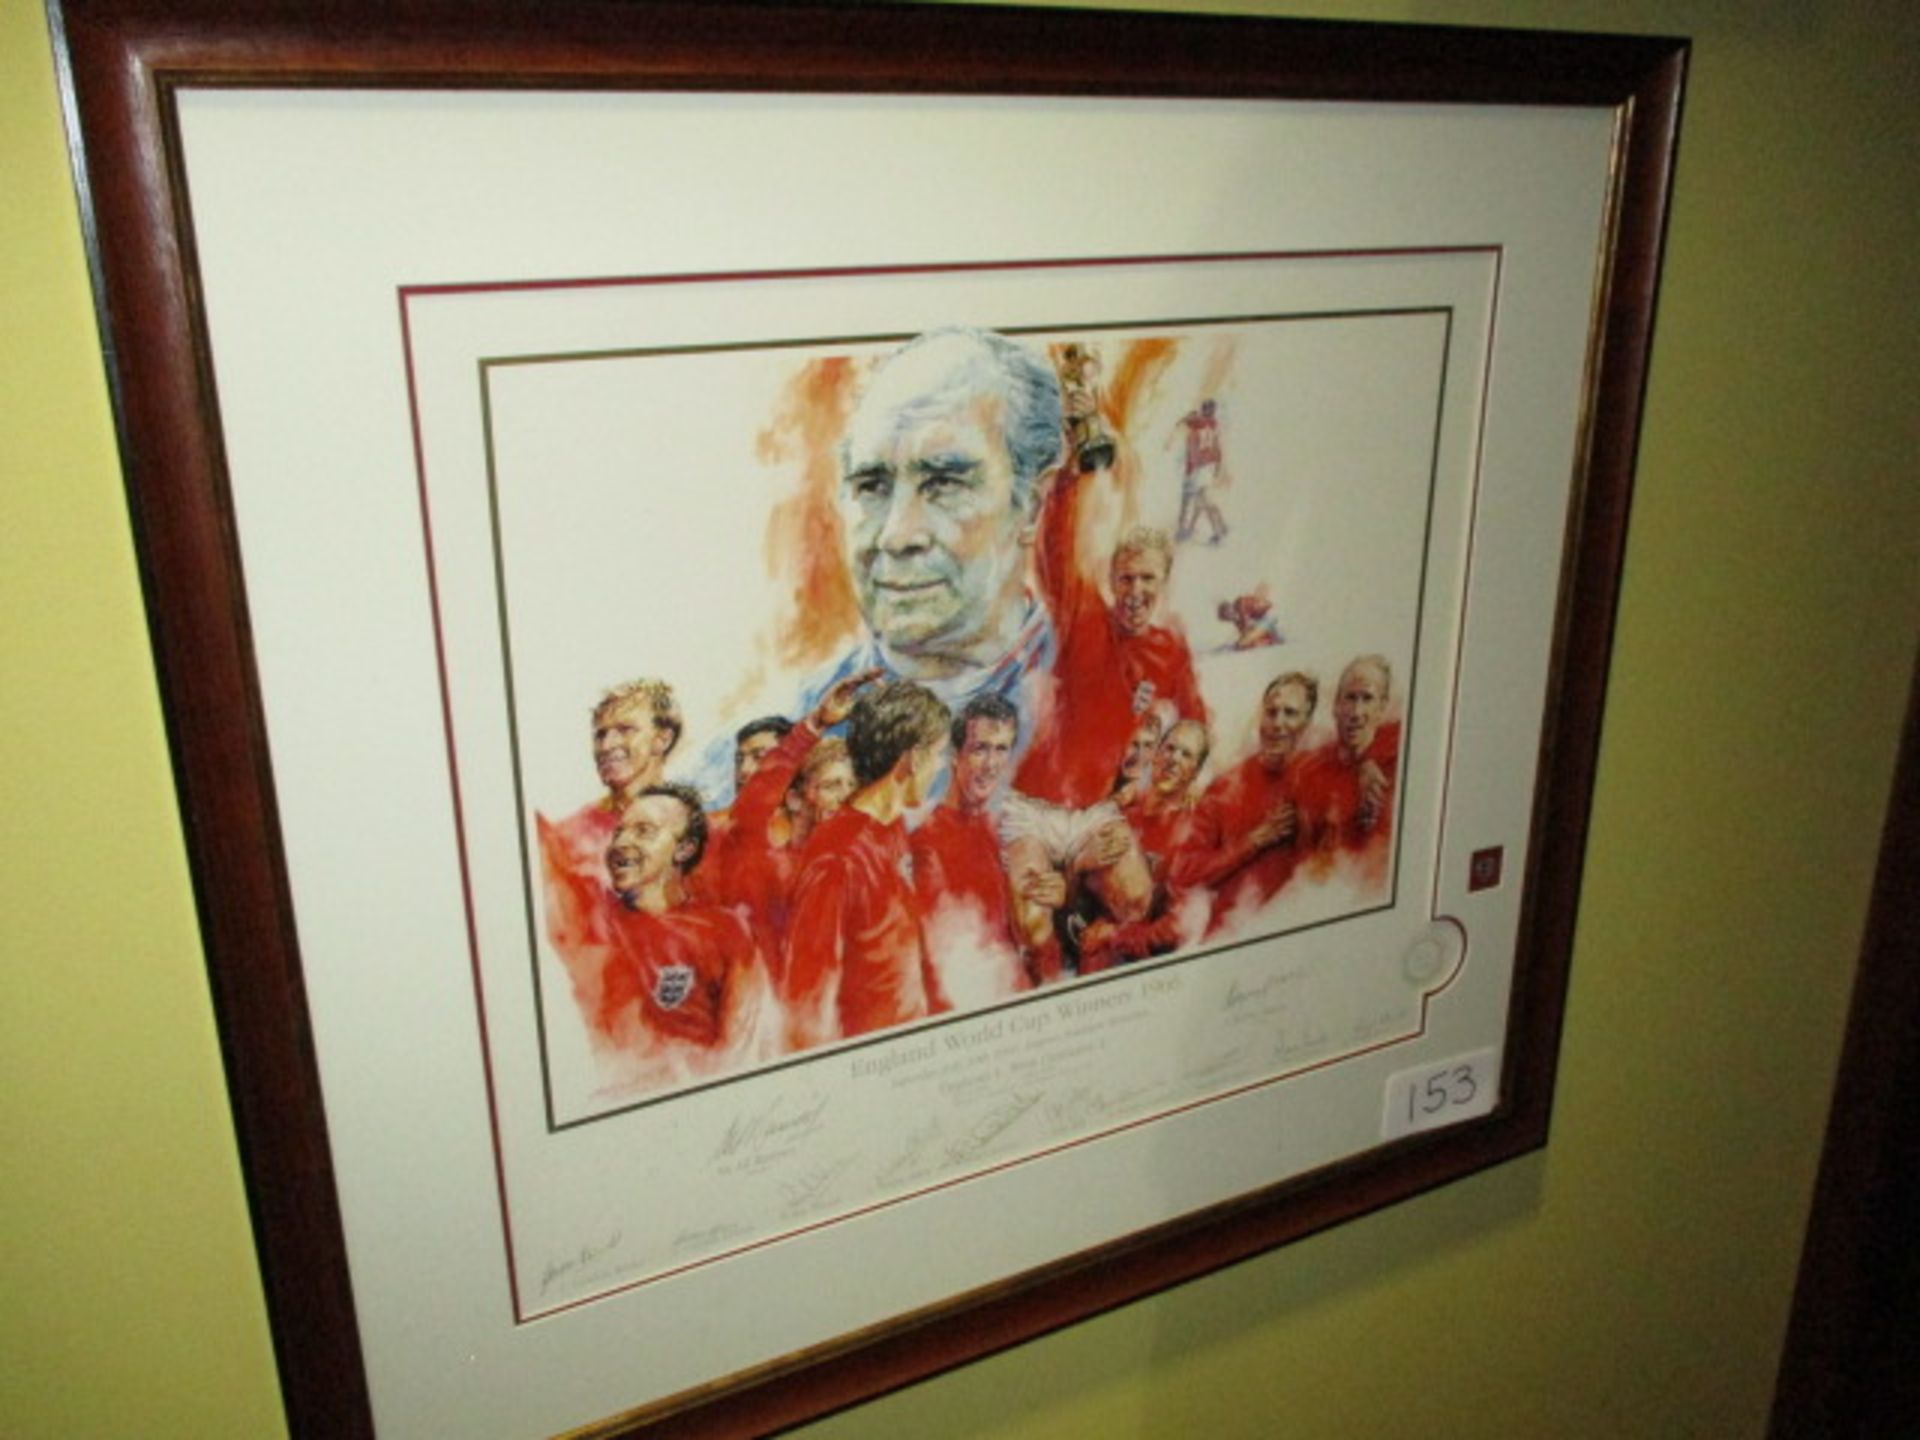 A signed limited edition print: England World Cup Winners 1966; signed in pencil by Sir Alf Ramsey - Image 2 of 2